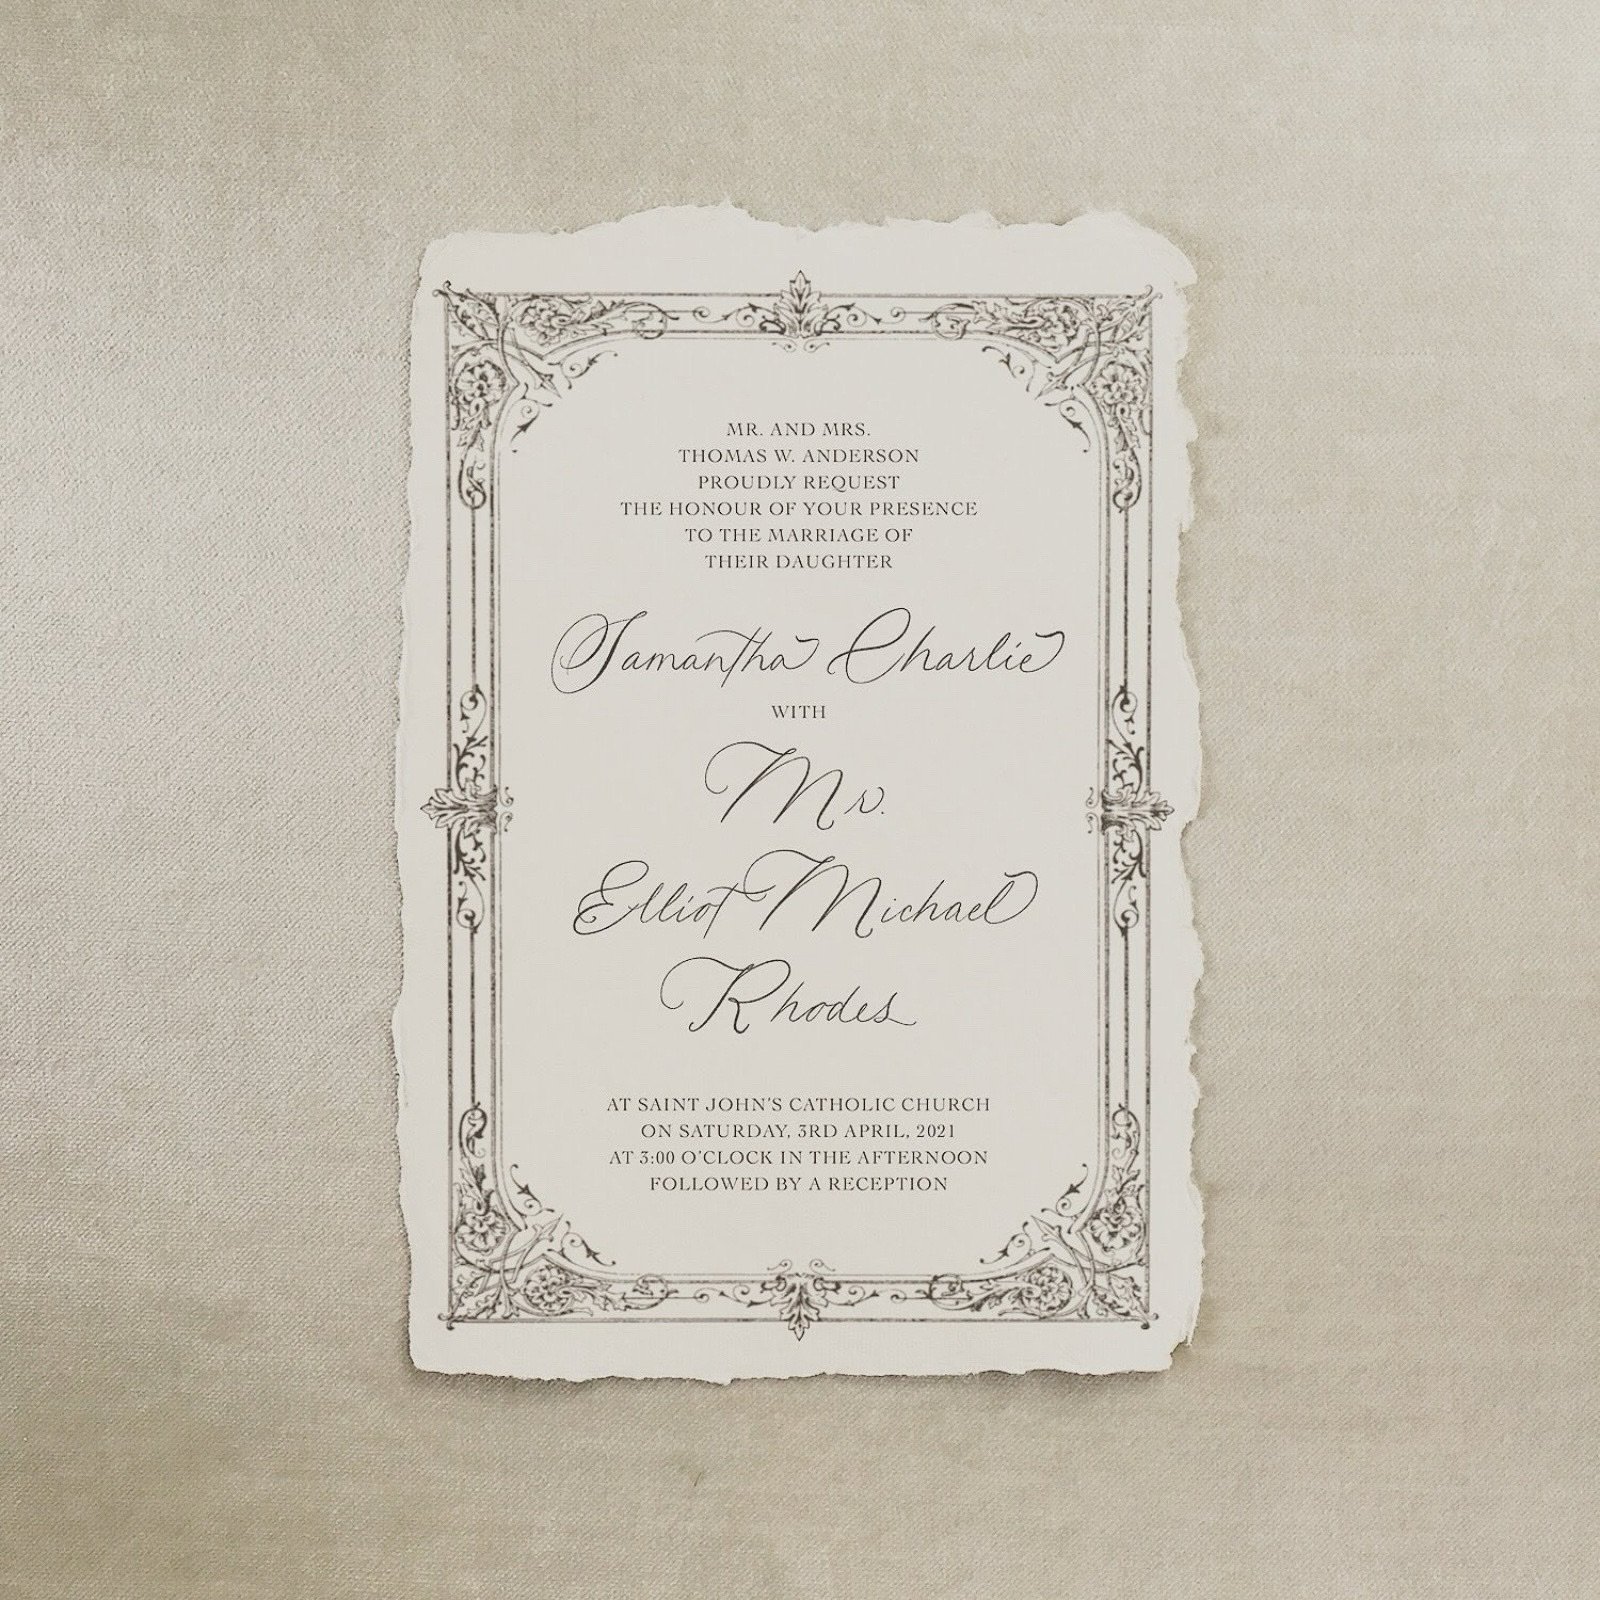 A European-inspired, old-world wedding invitation on handmade paper. We used a flat printing method for this beautiful creation. The vintage intricate border pulls in the lovely handwritten calligraphy and organic deckled edges. 🖤